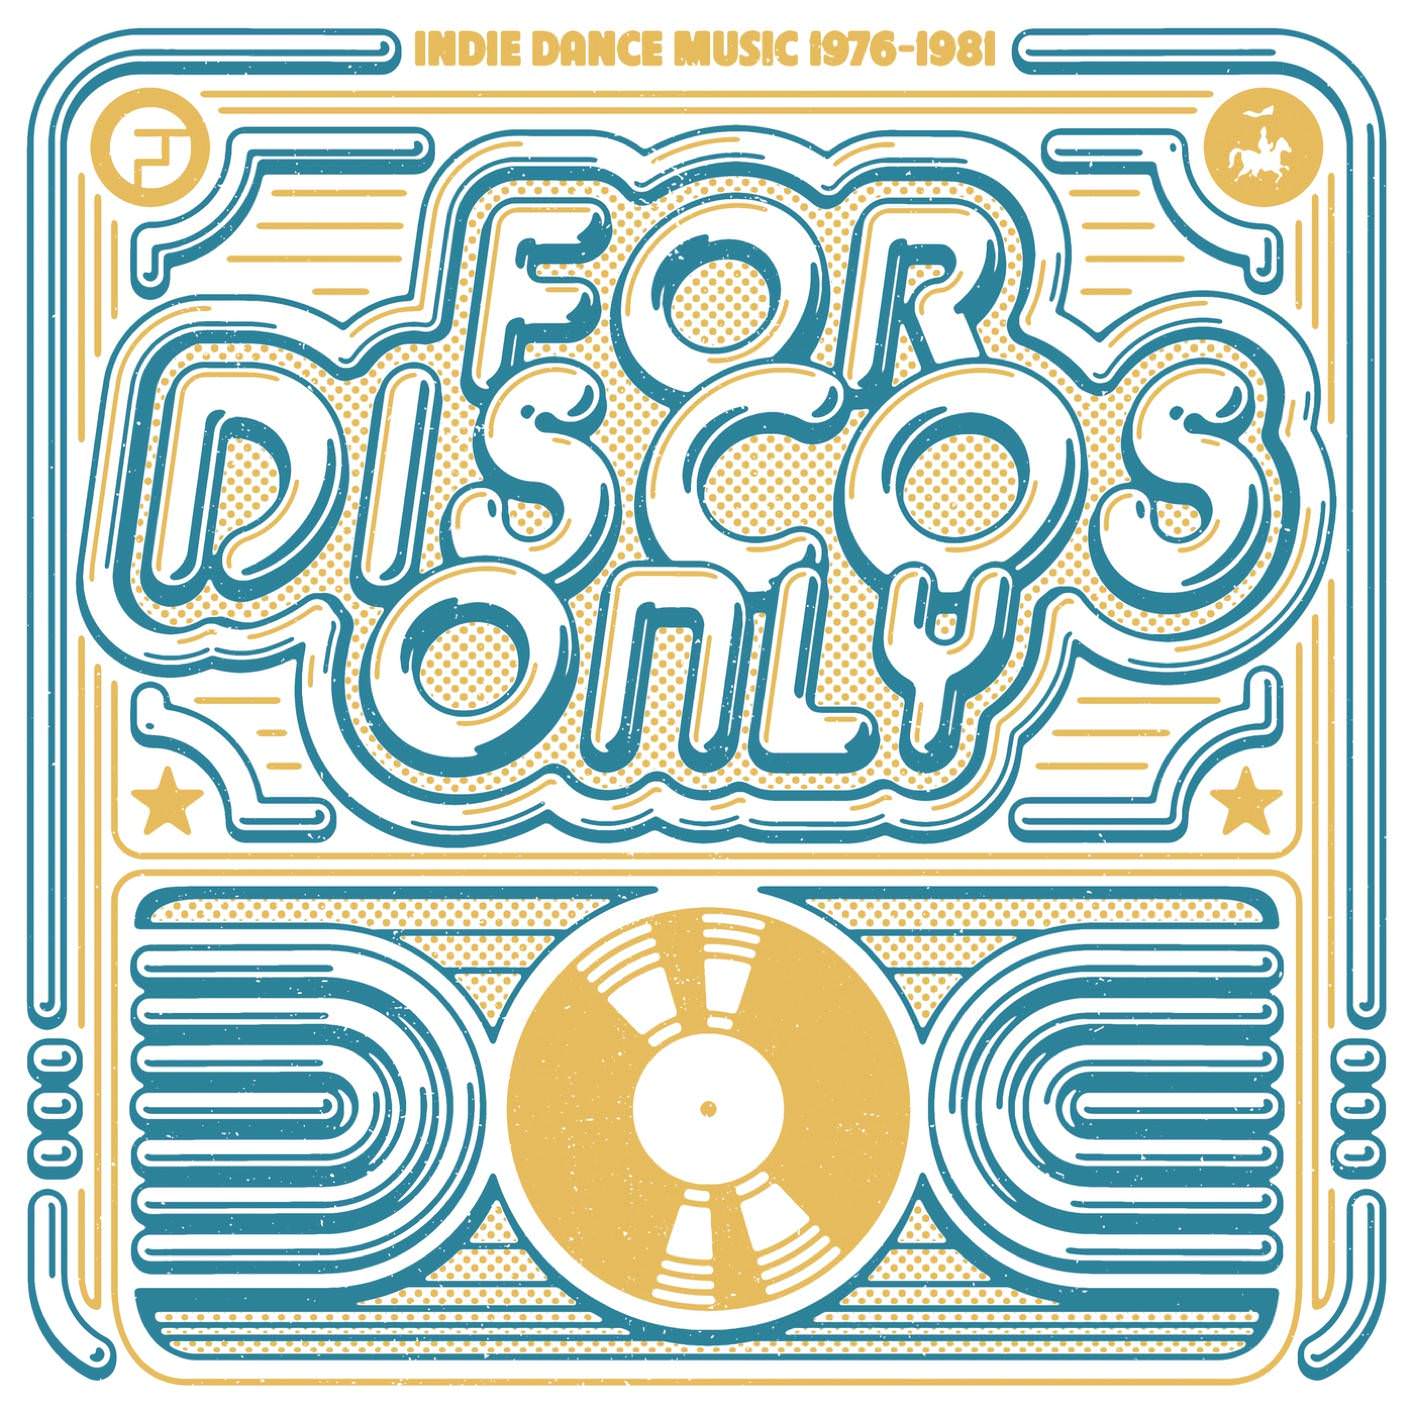 VA - For Discos Only: Indie Dance Music From Fantasy And Vanguard Records 1976-1981 (2018) [FLAC 24bit/192kHz]